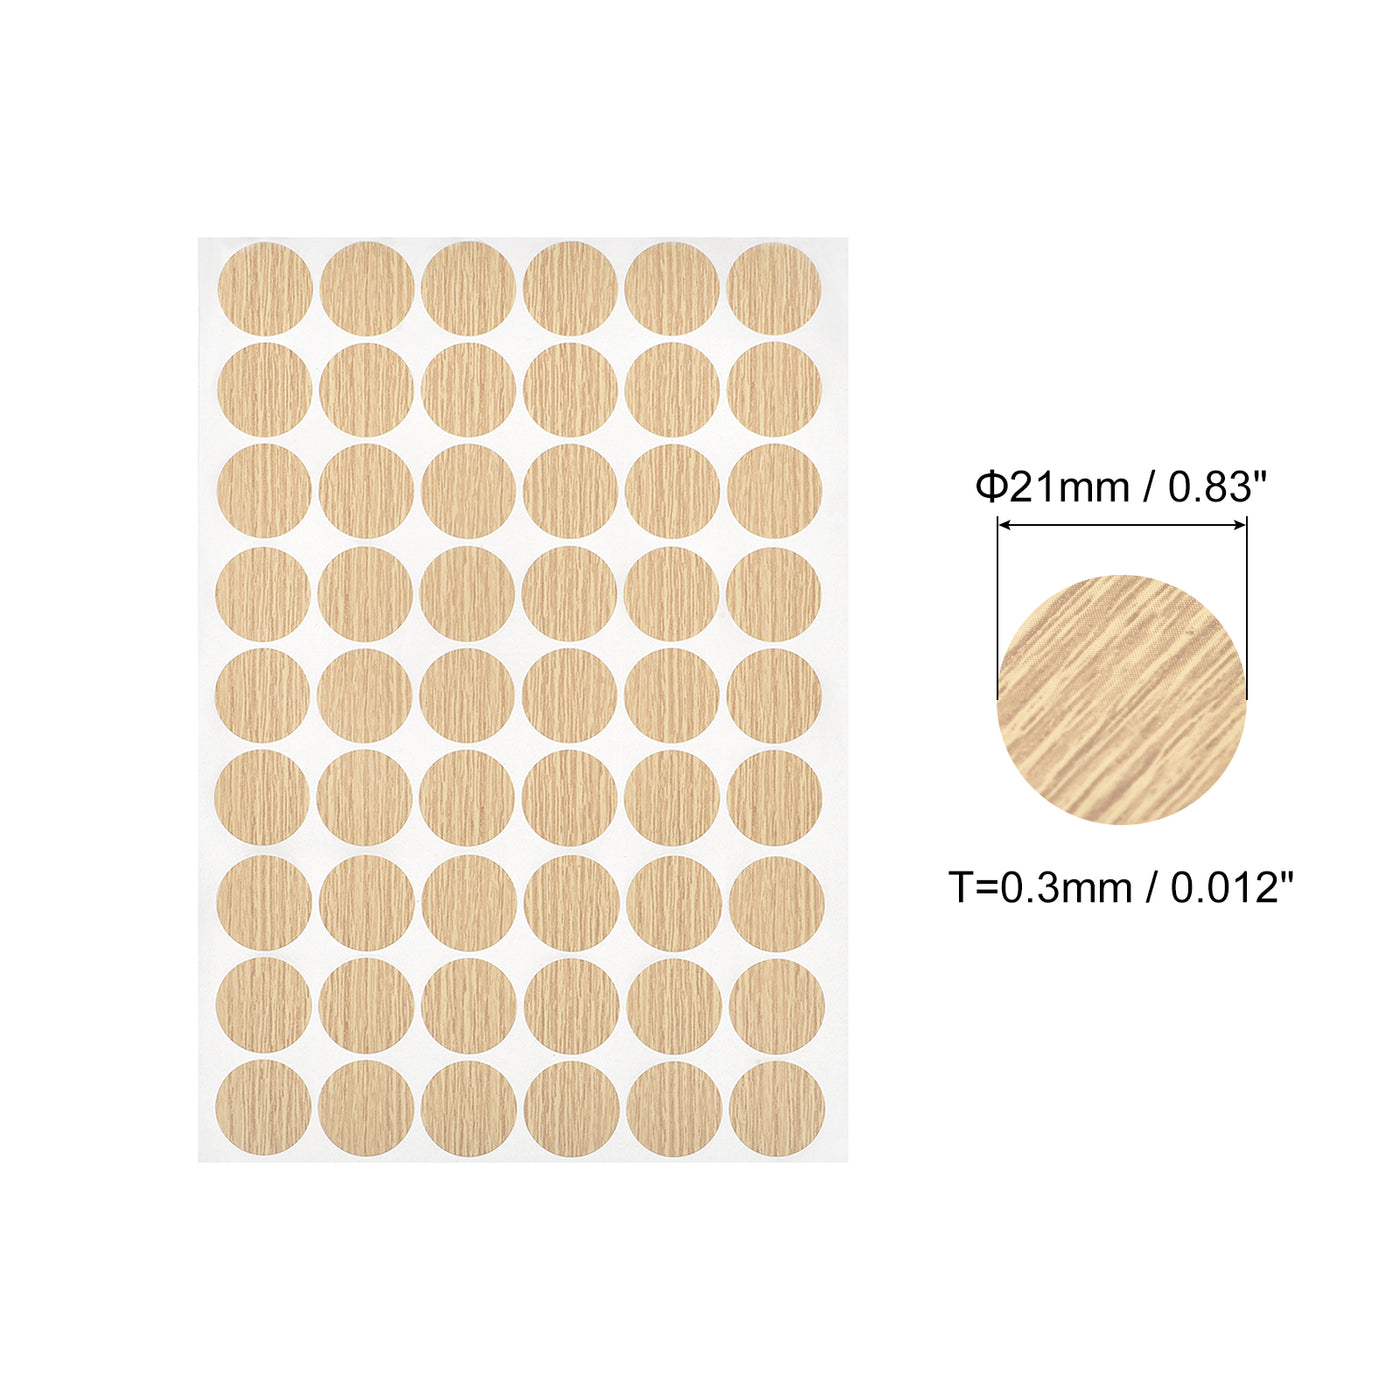 uxcell Uxcell Screw Hole Cover Stickers, 21mm Dia PVC Self Adhesive Covers Caps for Wood Furniture Cabinet Shelf Wardrobe, Oak 6 Sheet/324pcs